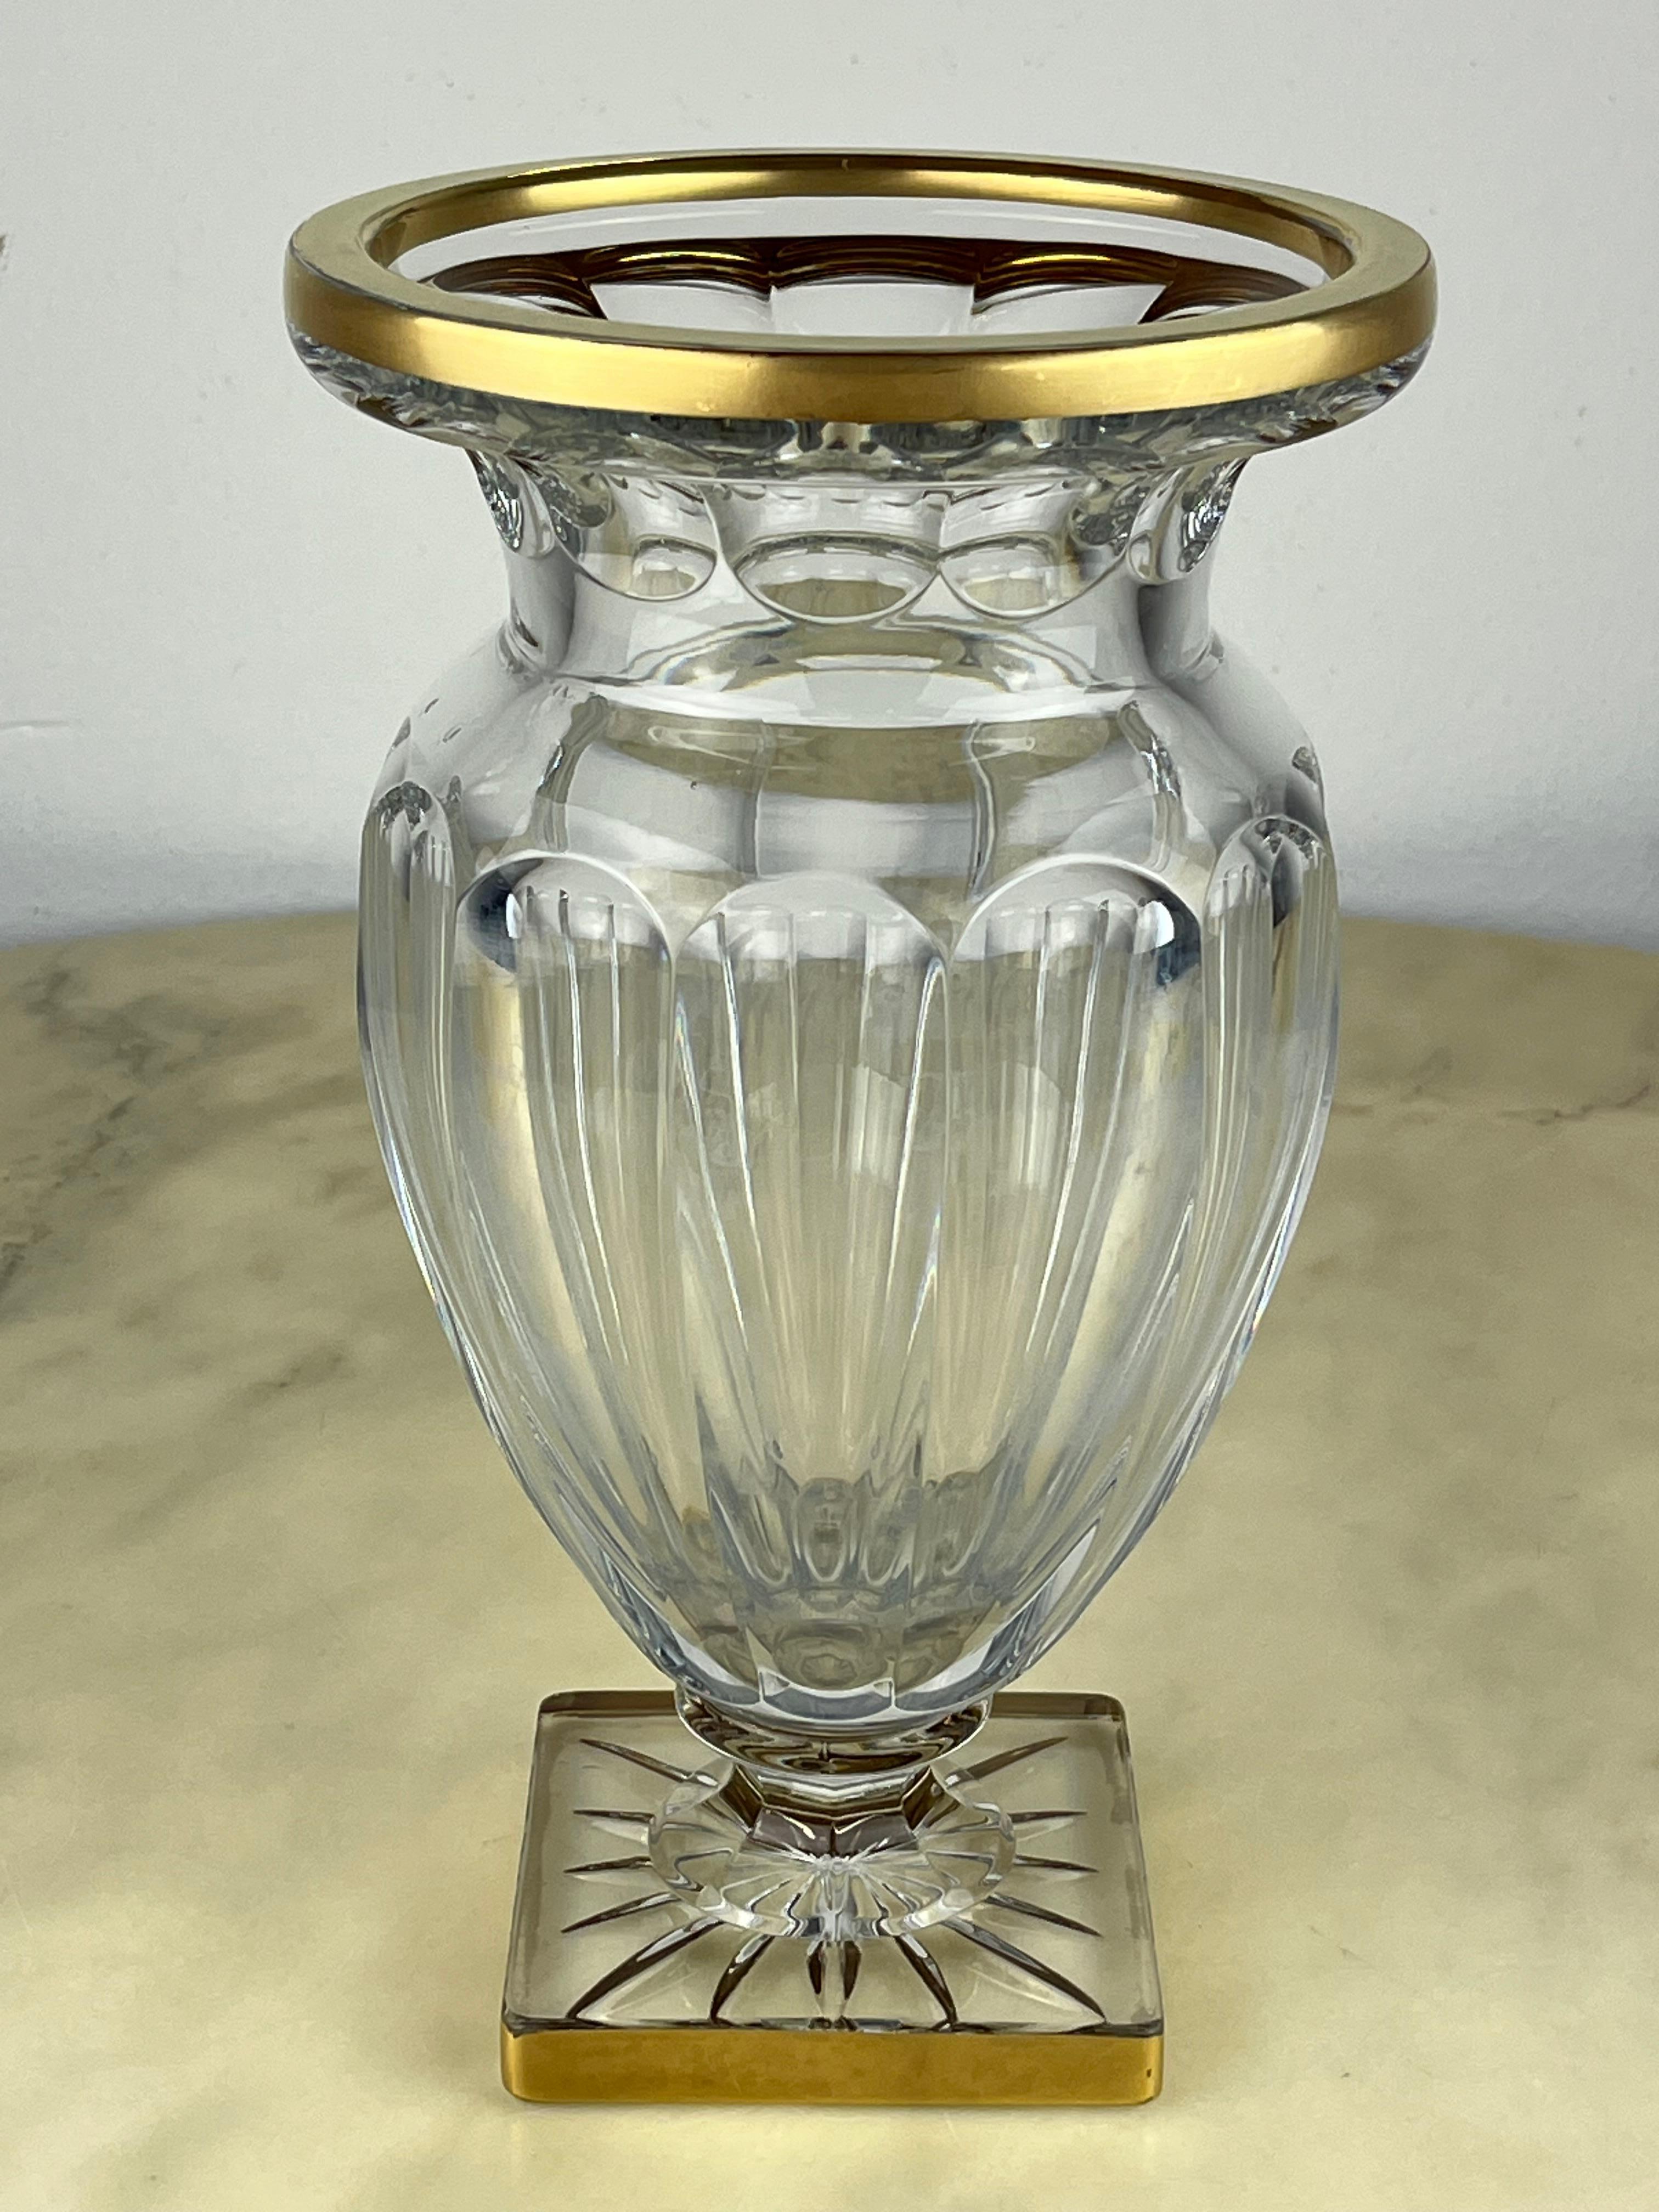 Lead crystal vase, France, 1980s
Intact, it has pure gold decorations on the edges which have small defects.
It is very beautiful and elegant.
If you look at the descriptive photographs, you will notice small air bubbles inside the glass which